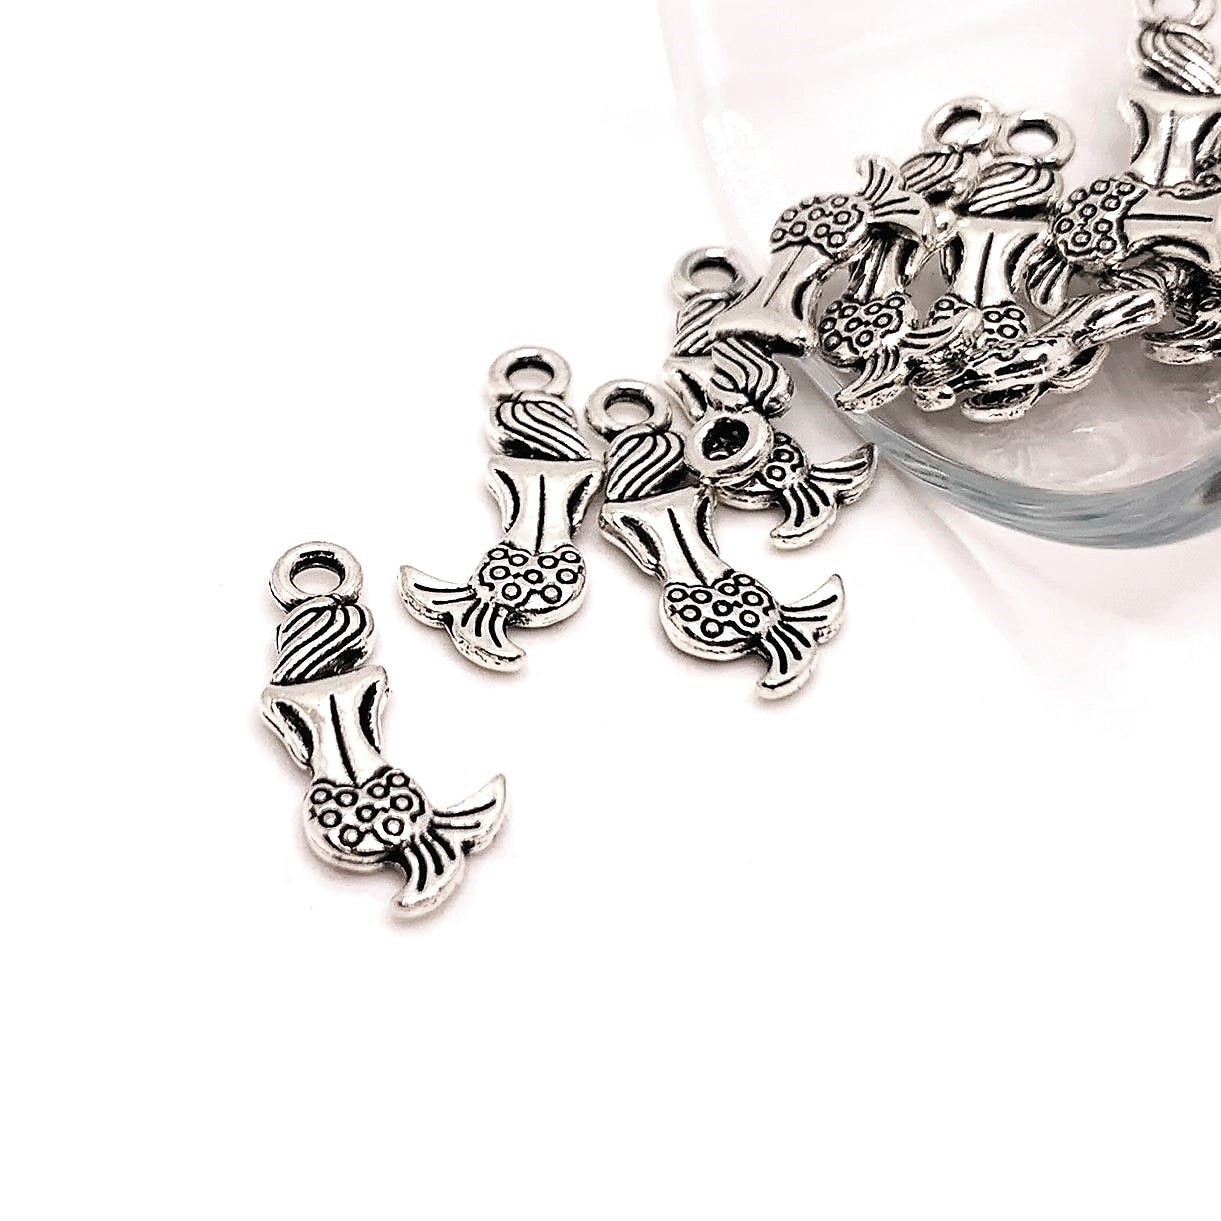 4, 20 or 50 Pieces: Silver Mermaid Charms - Double Sided